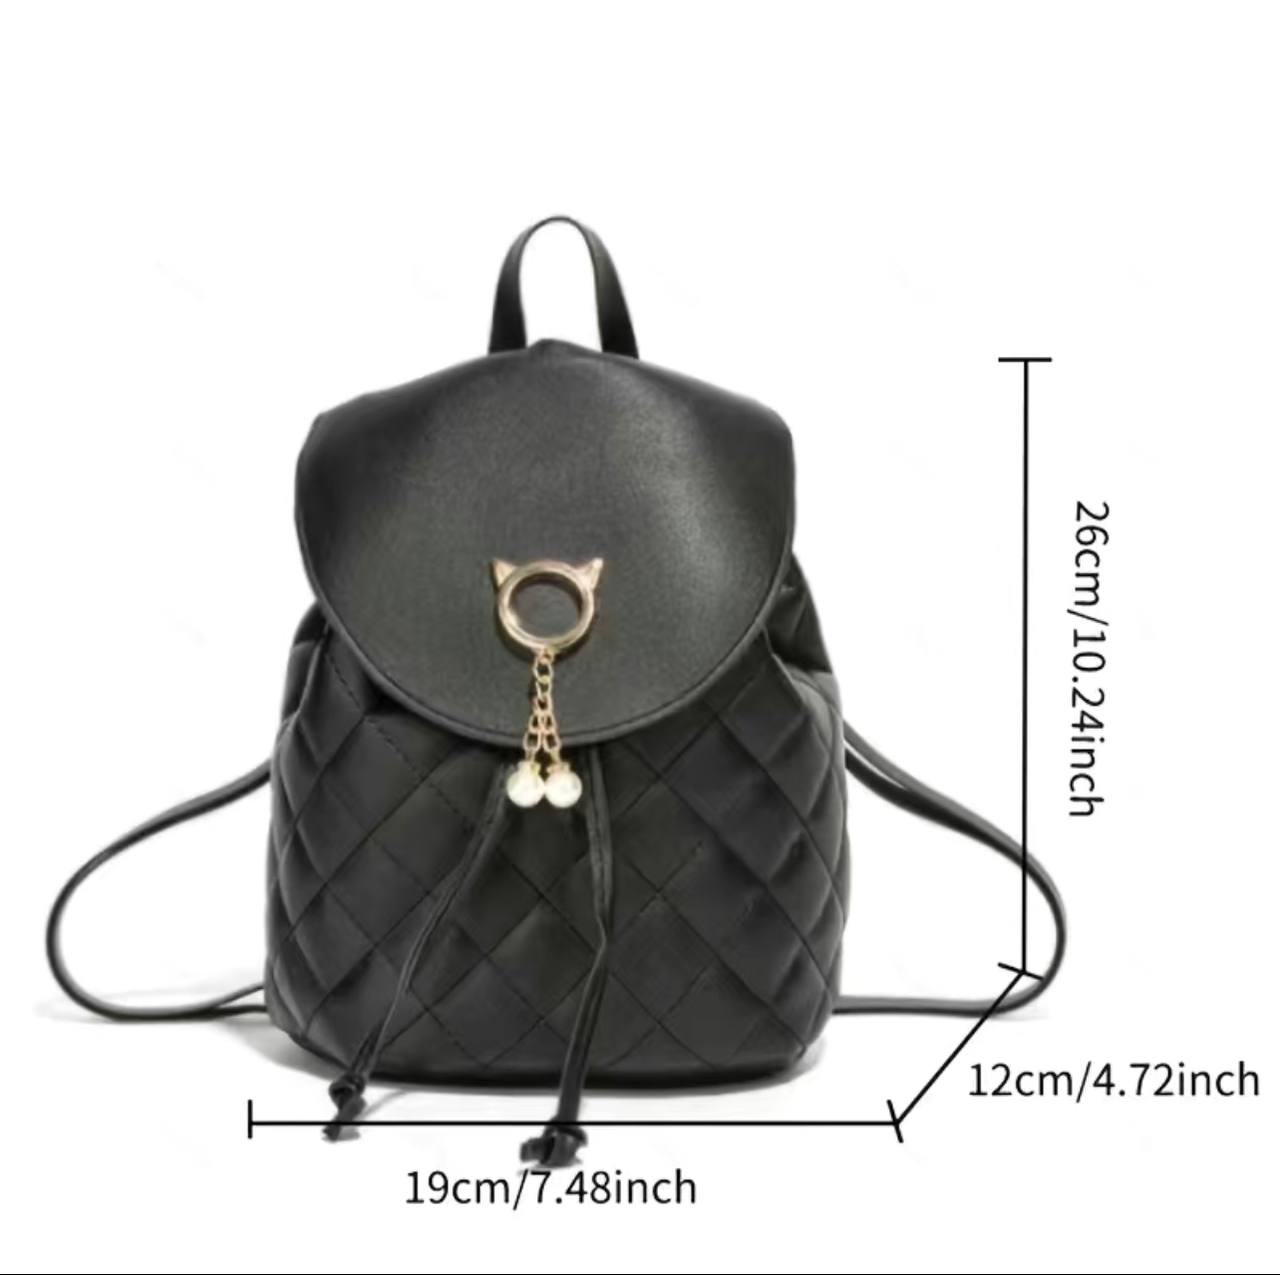 New Mini Outdoor Leisure Backpack, Simple Design Quilted Backpack Mini Backpack (10.24*7.48*4.72) Inch